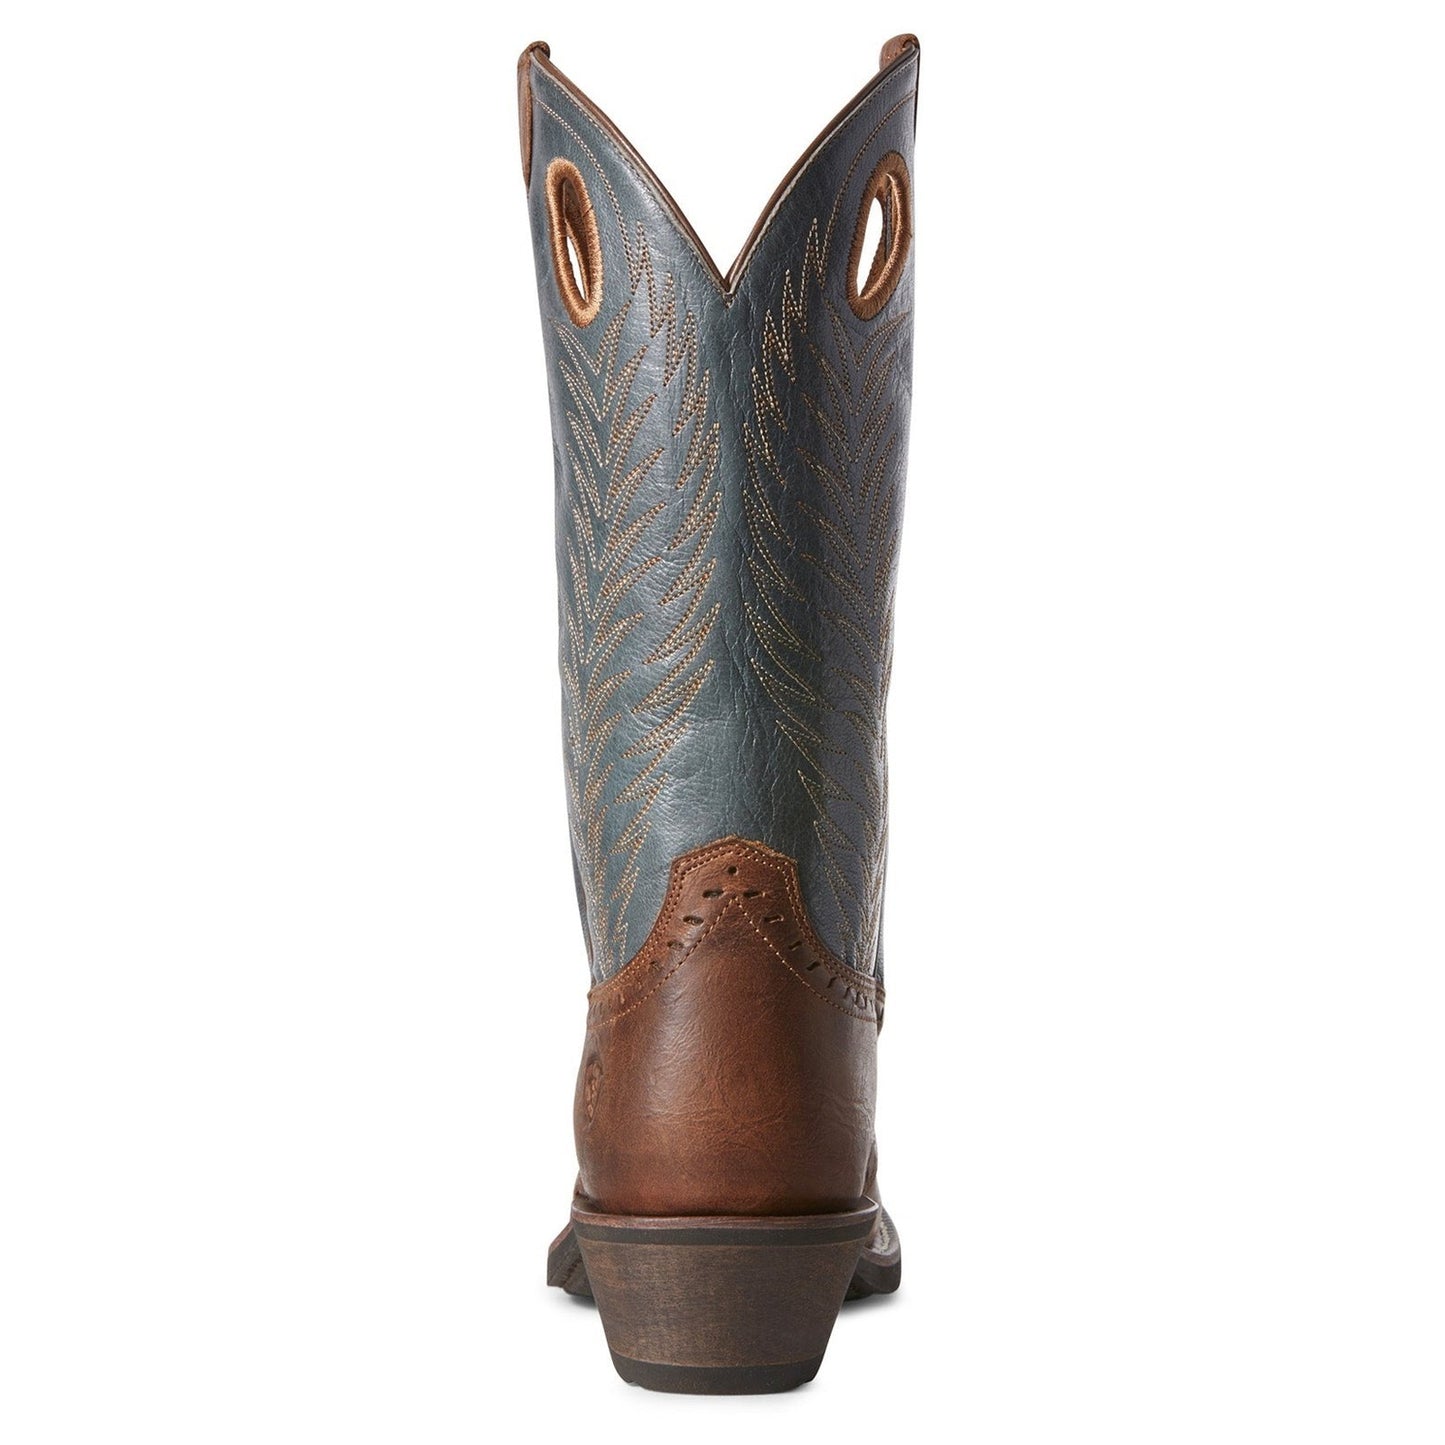 Ariat Women's Cowgirl Boots Heritage Rancher 10027372 - Ariat